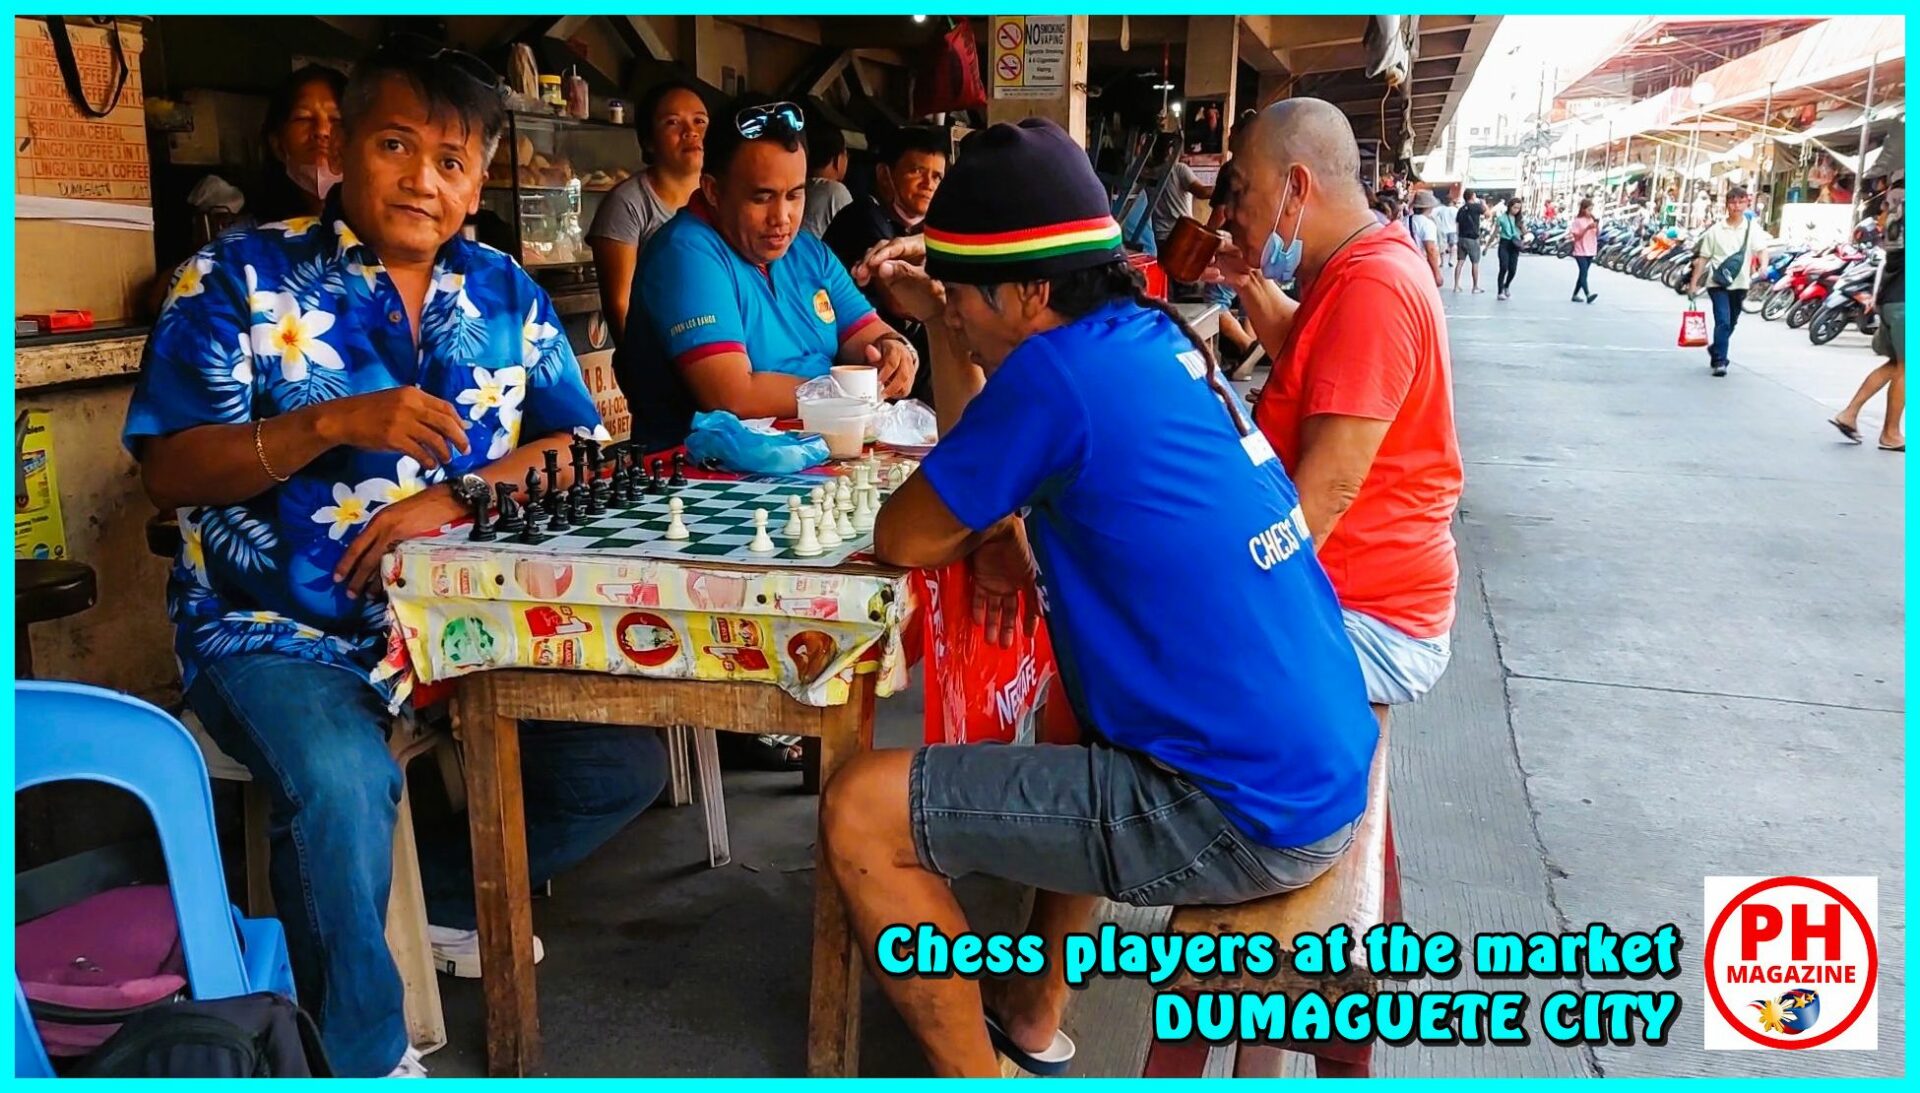 SIGHTS OF NEGROS ORIENTAL - PHOTO OF THE DAY - Chess players at the market in Dumaguete City